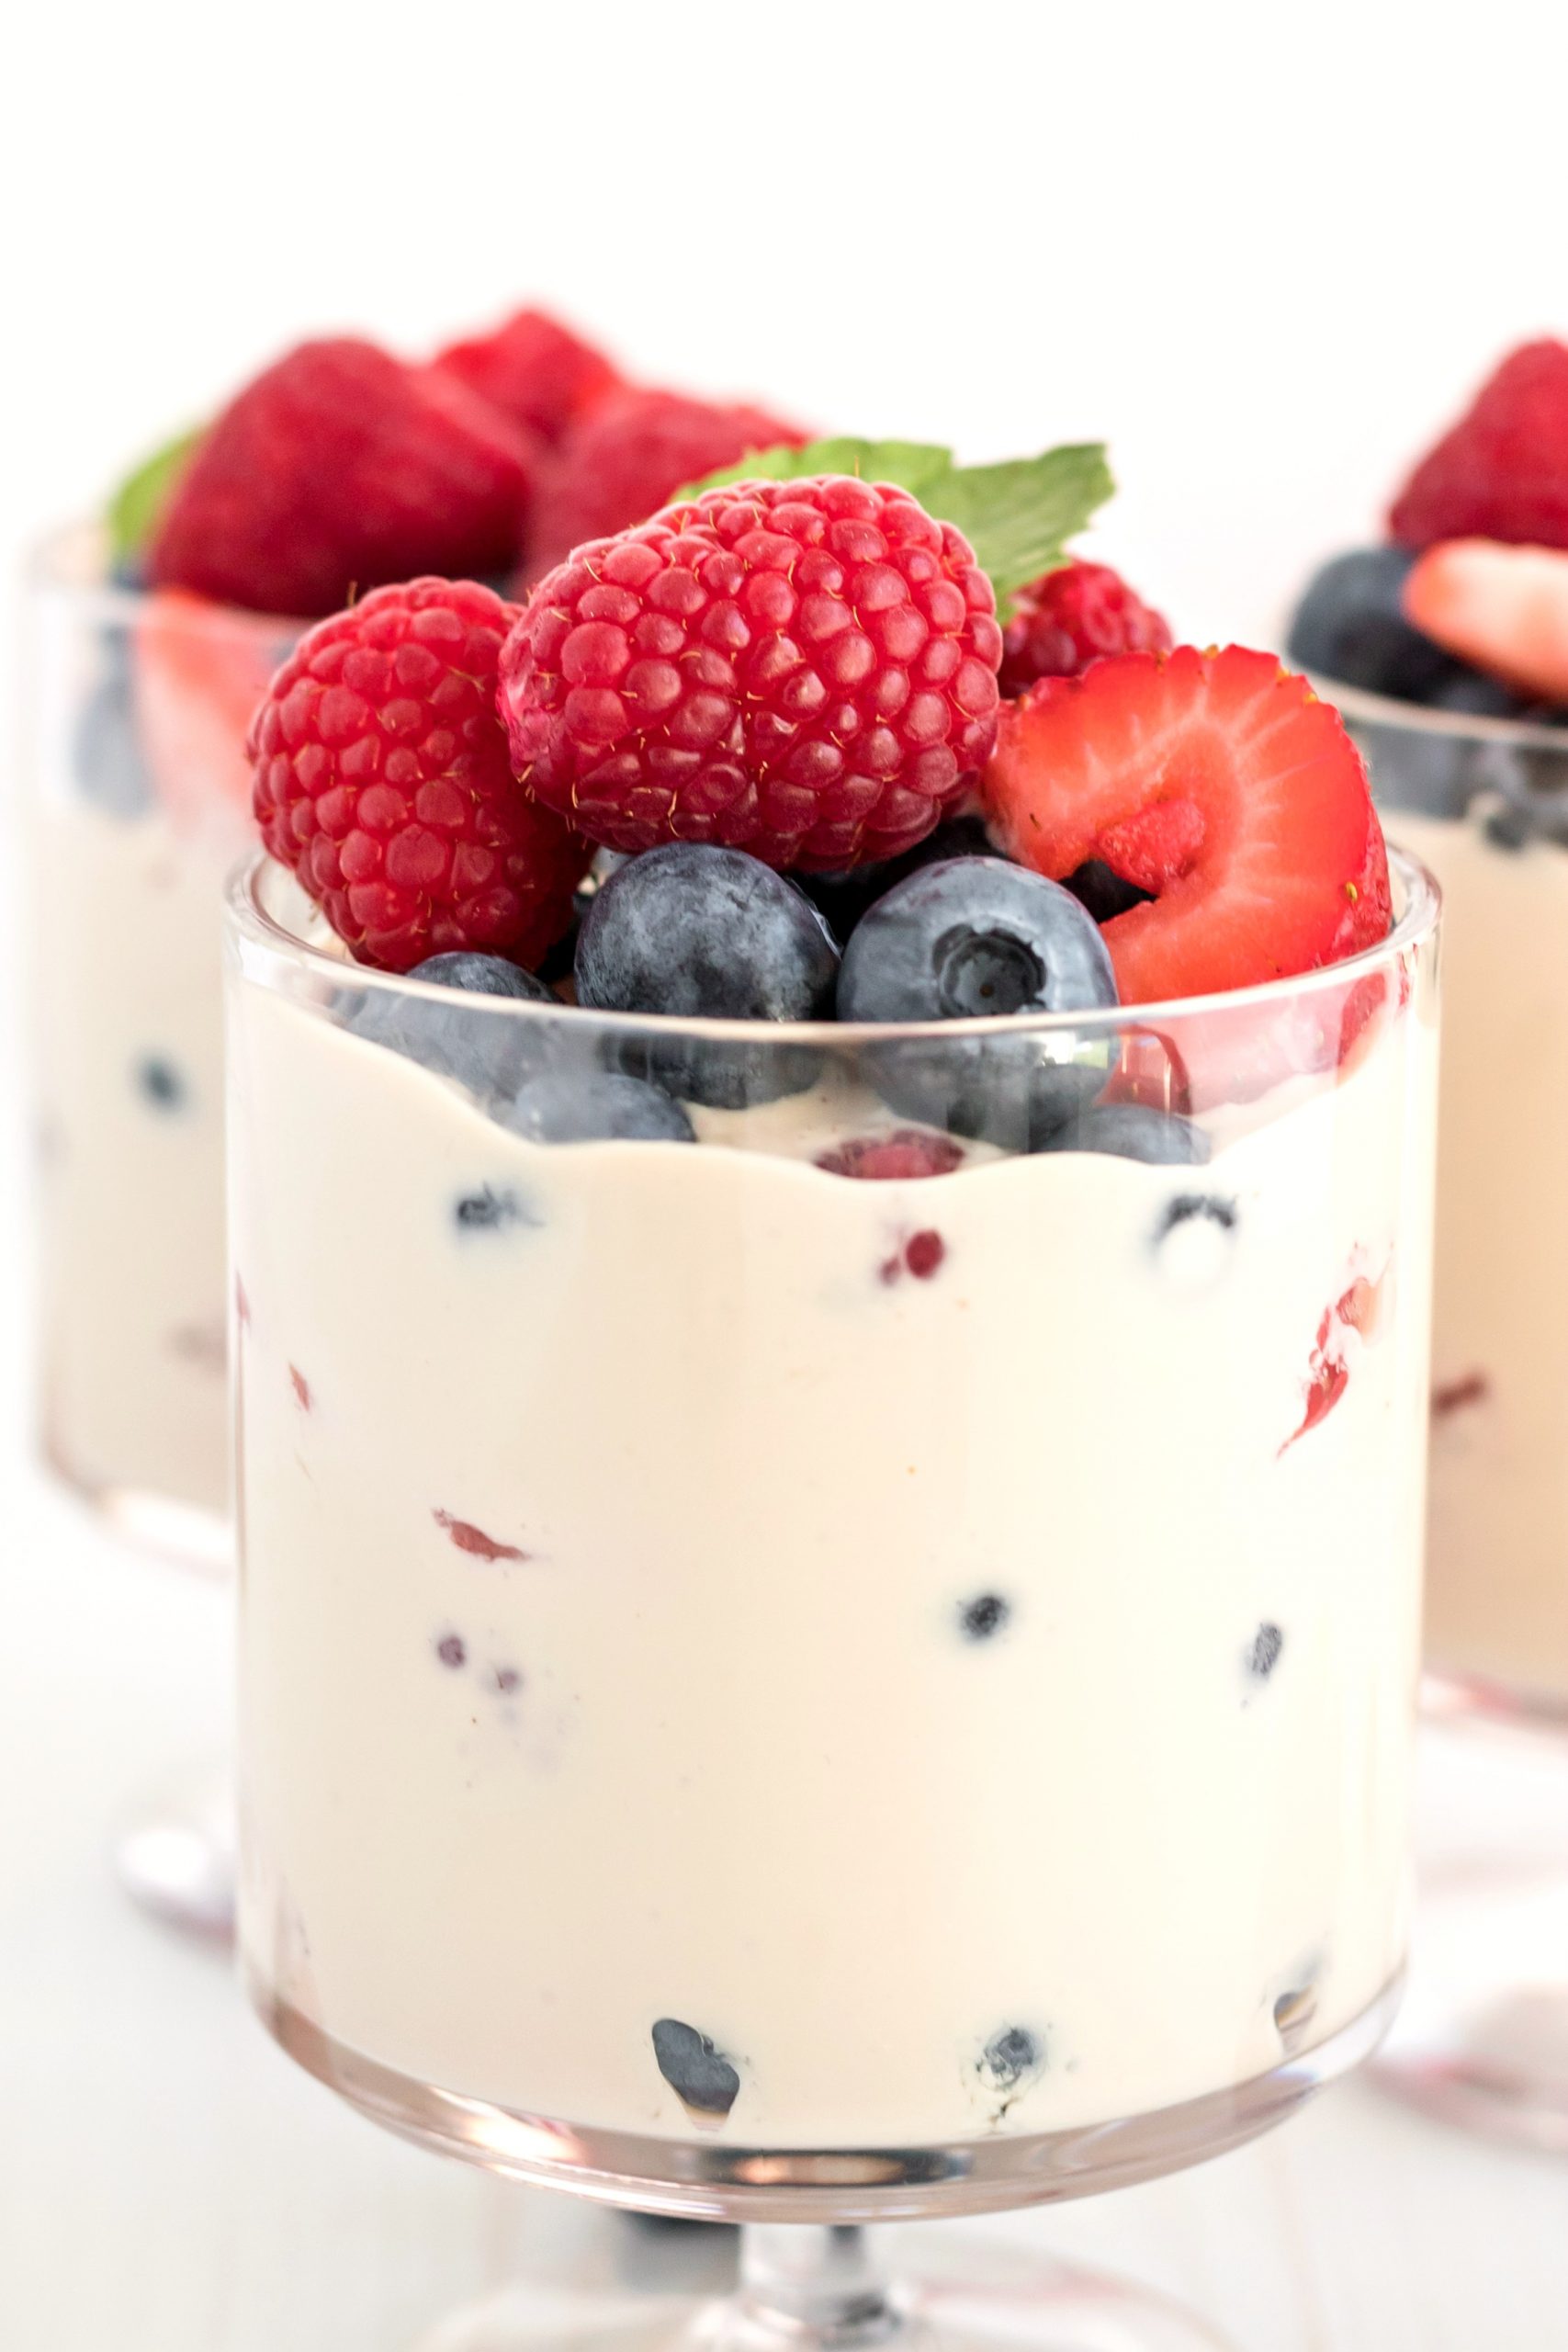 Assorted berries folded in and atop of a creamy mixture in a dessert cup